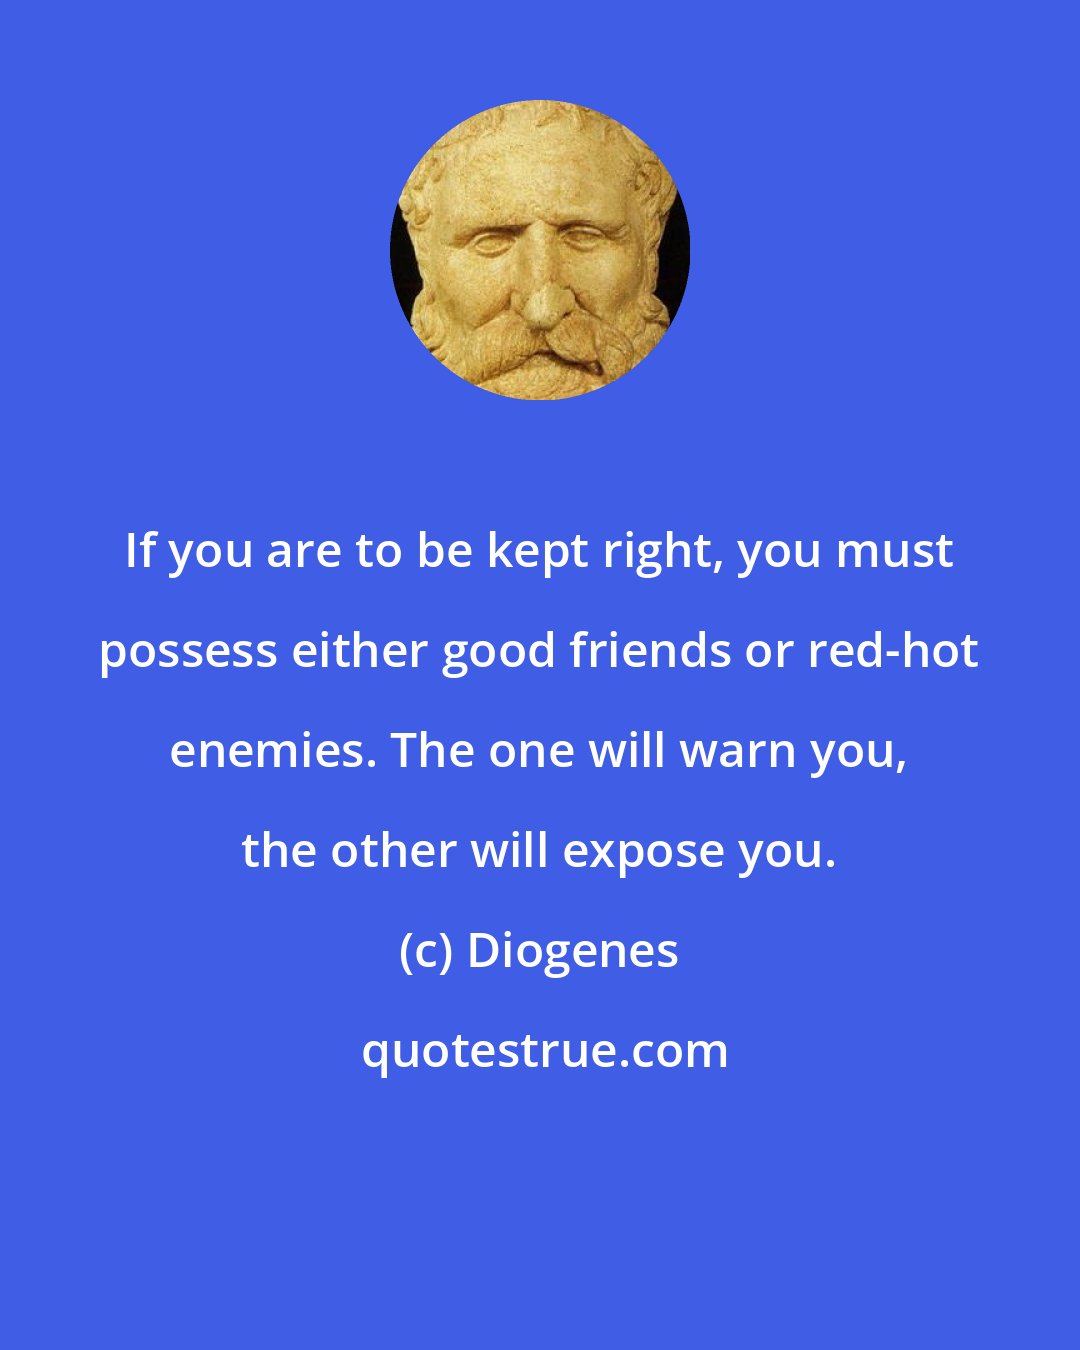 Diogenes: If you are to be kept right, you must possess either good friends or red-hot enemies. The one will warn you, the other will expose you.